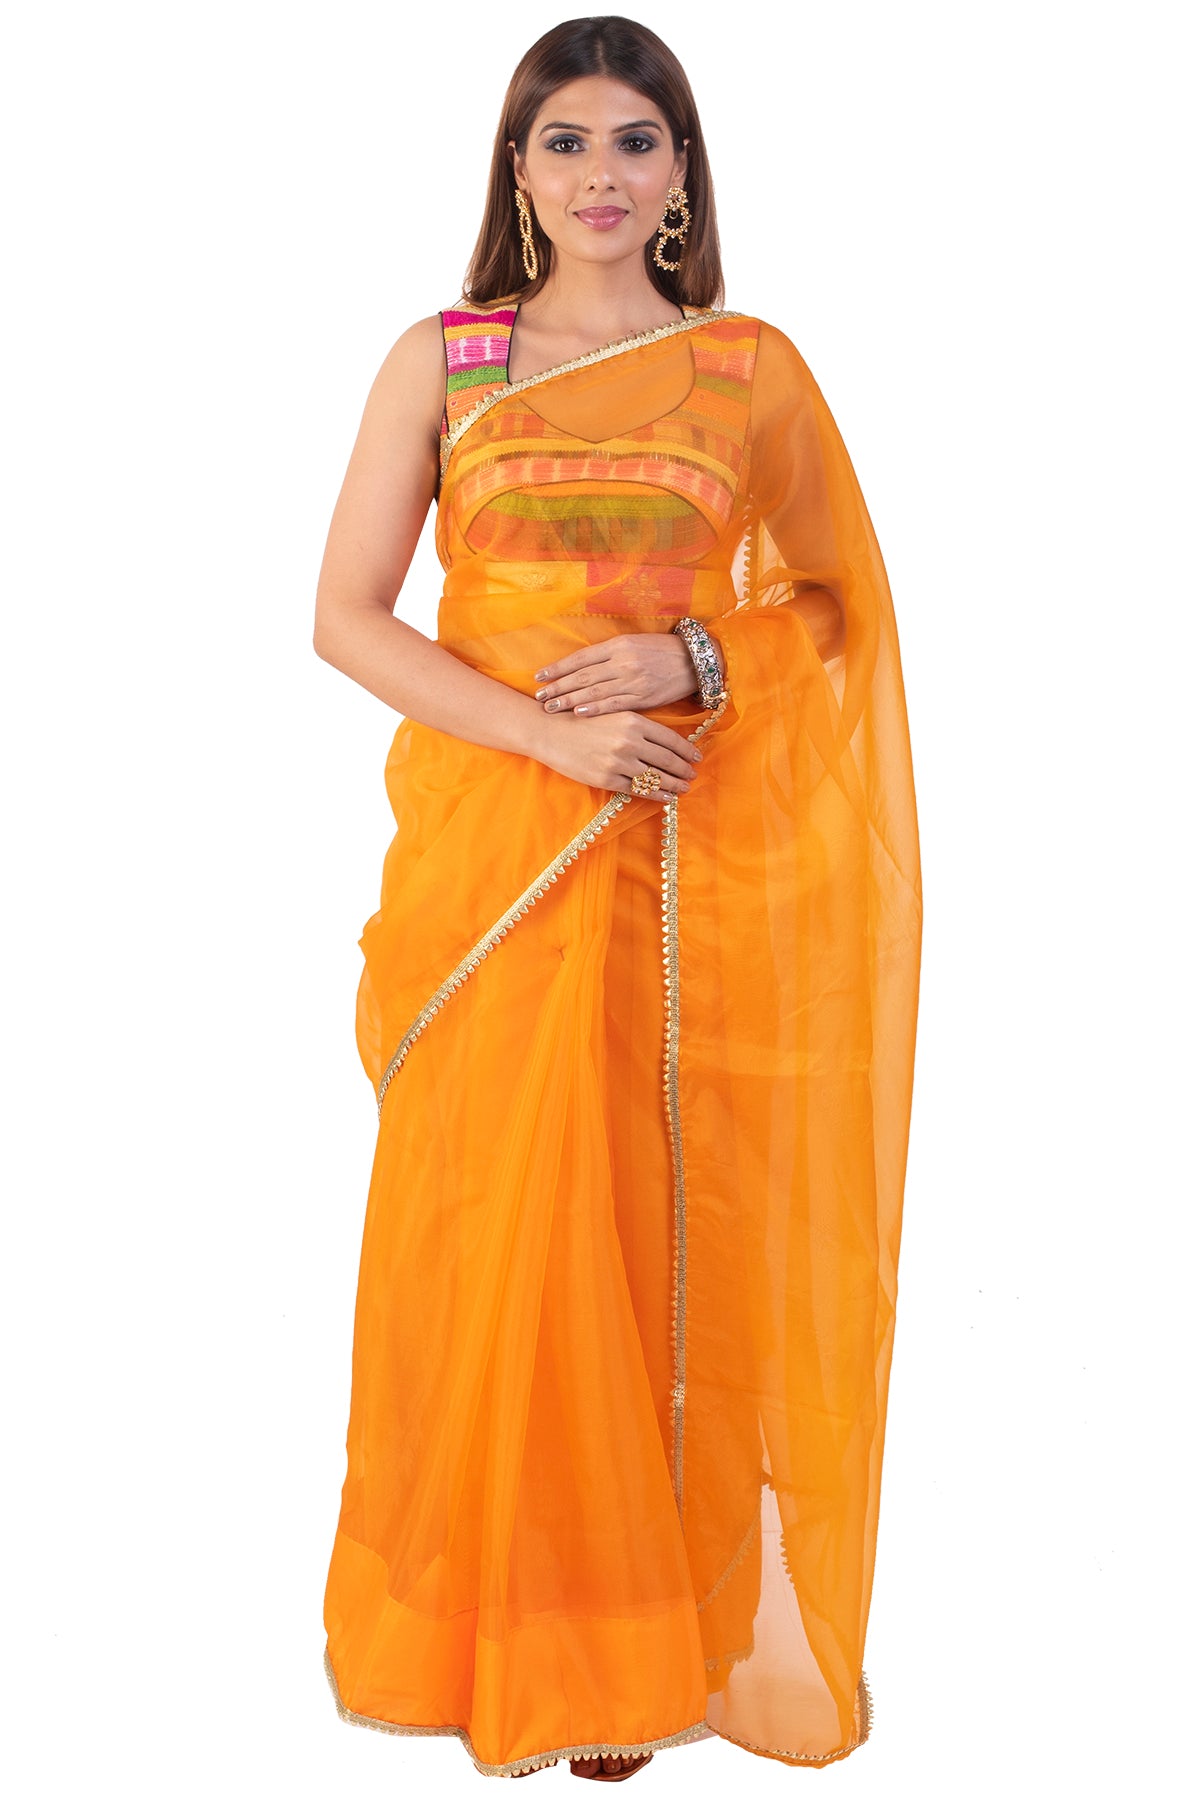 There is nothing more engaging than colors, the sleeveless blouse that is an amalgamation of a range of colors paired with a plain orange saree is the elephant in the room!